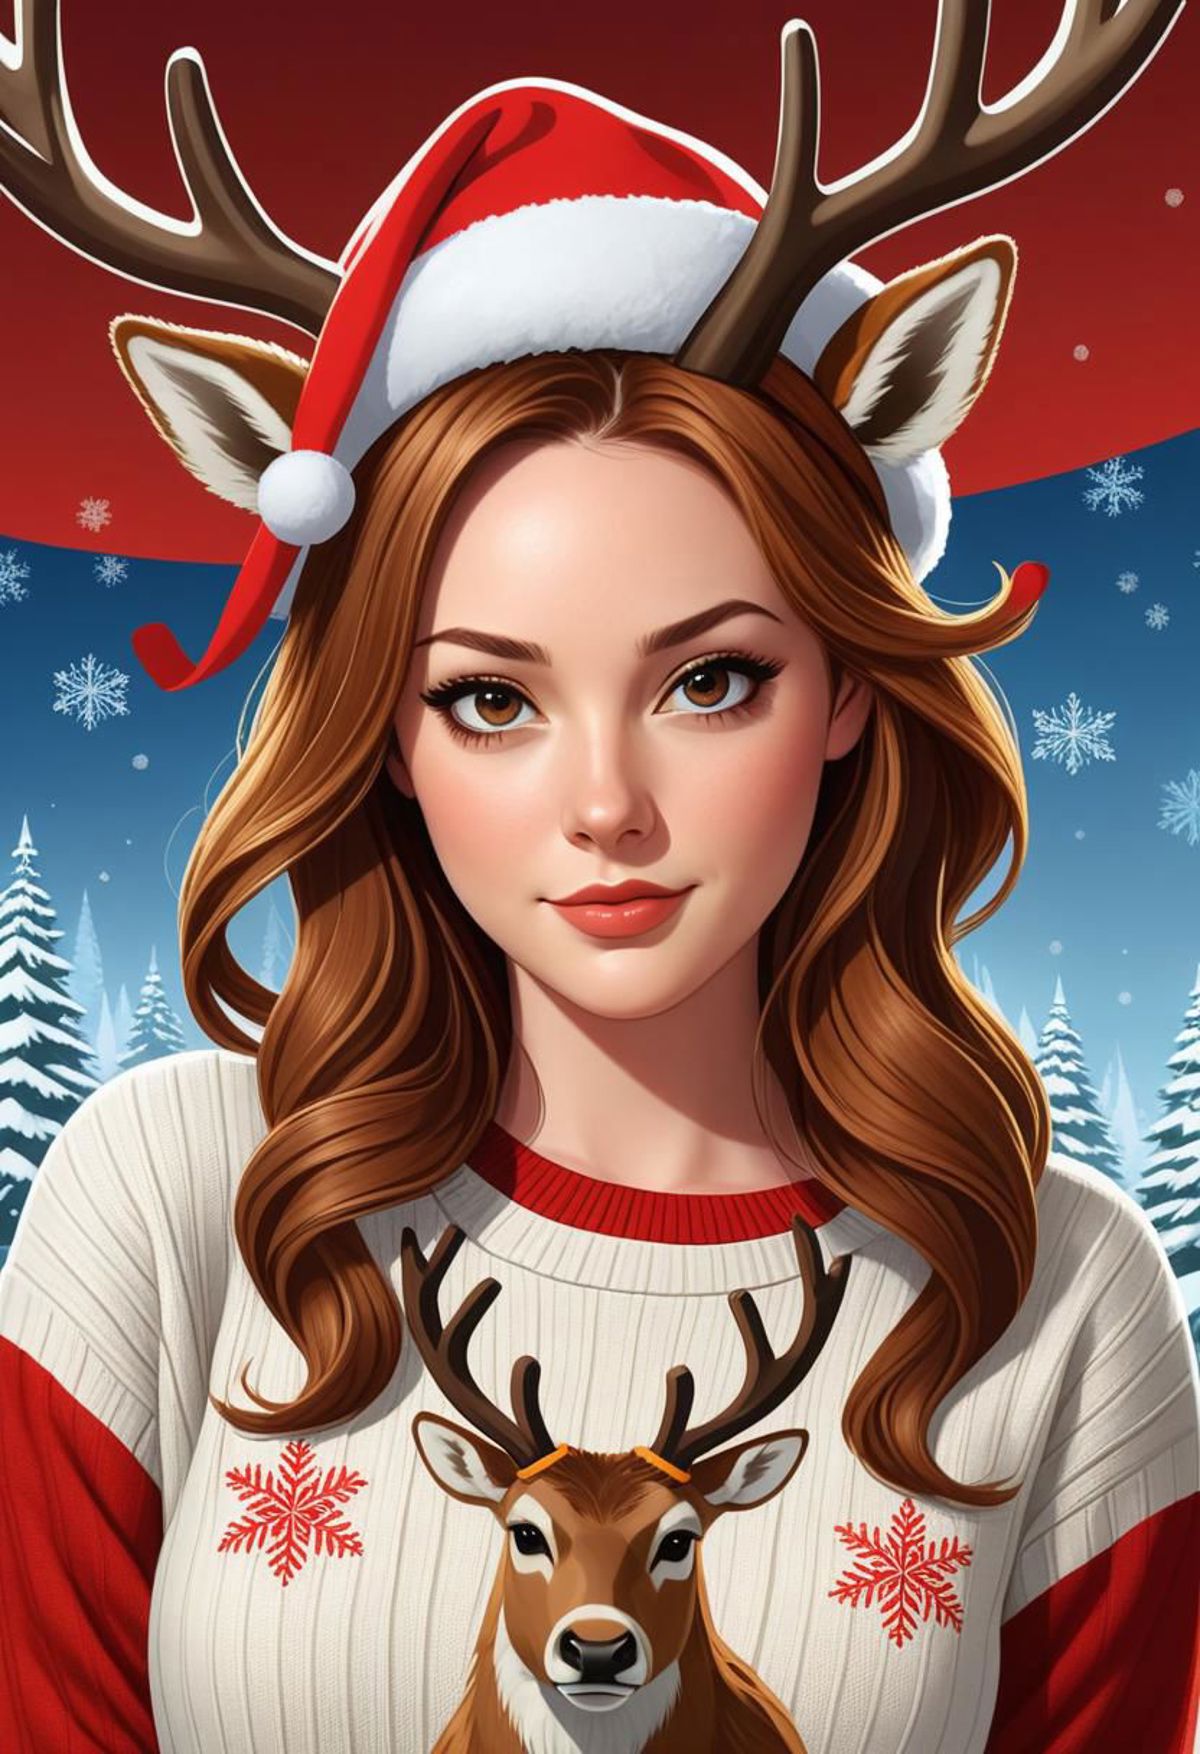 An Illustrated Image of a Woman Wearing a Santa Hat and Sweater with Reindeer Around Her Neck.